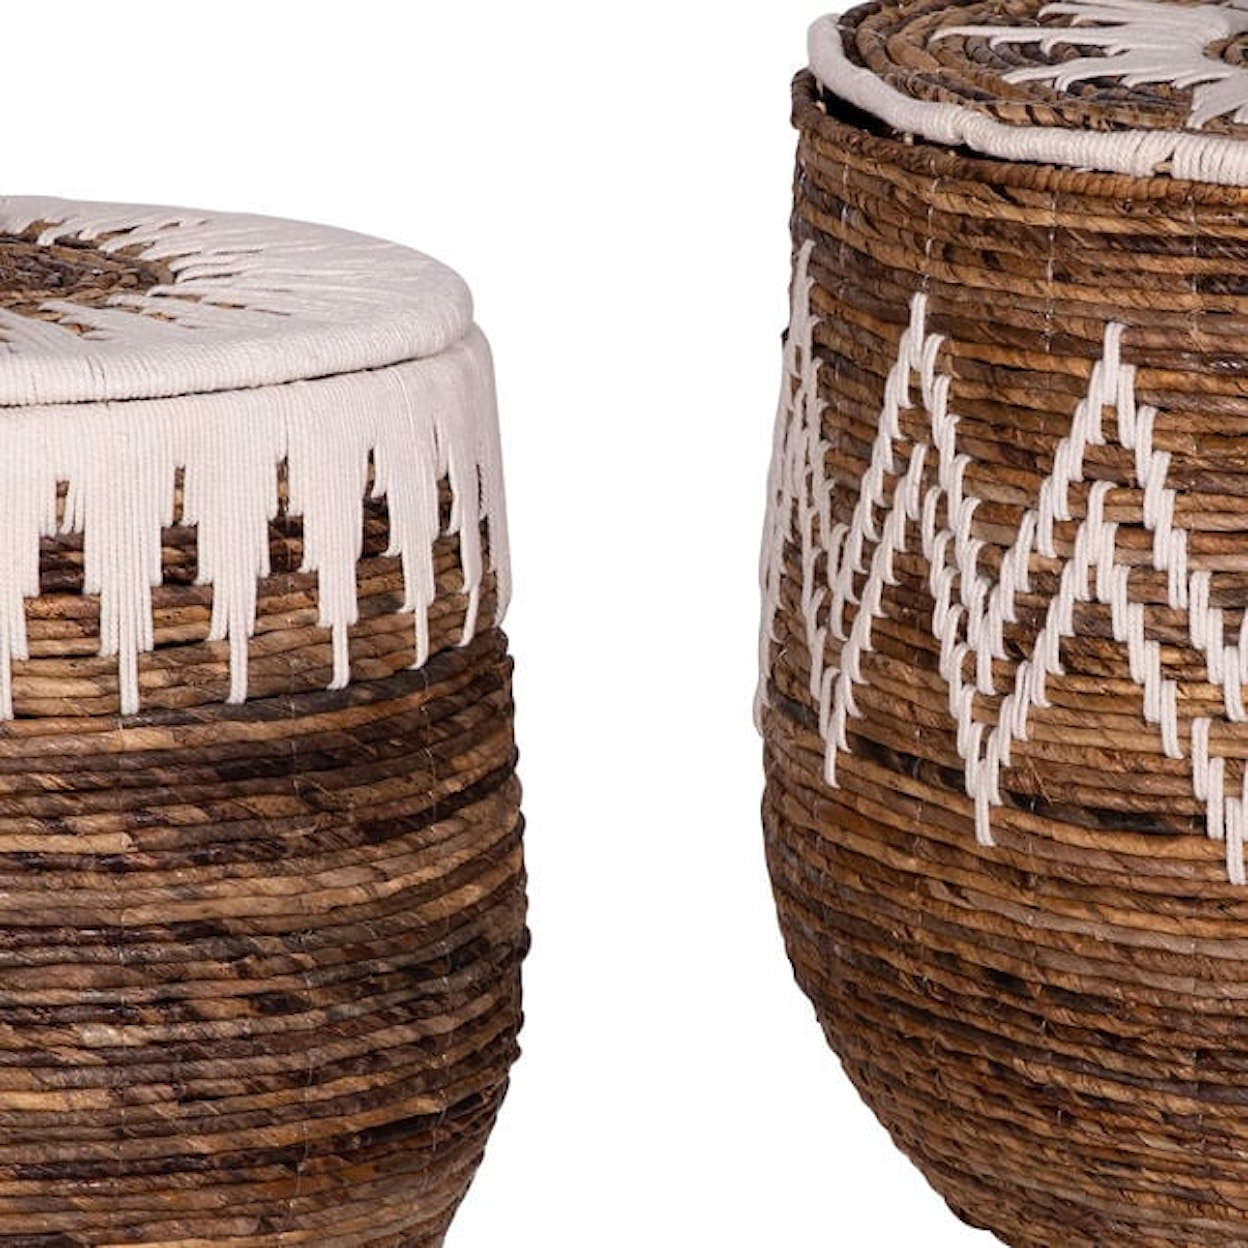 Dovetail Furniture Accessories Lina Basket Set Of 2